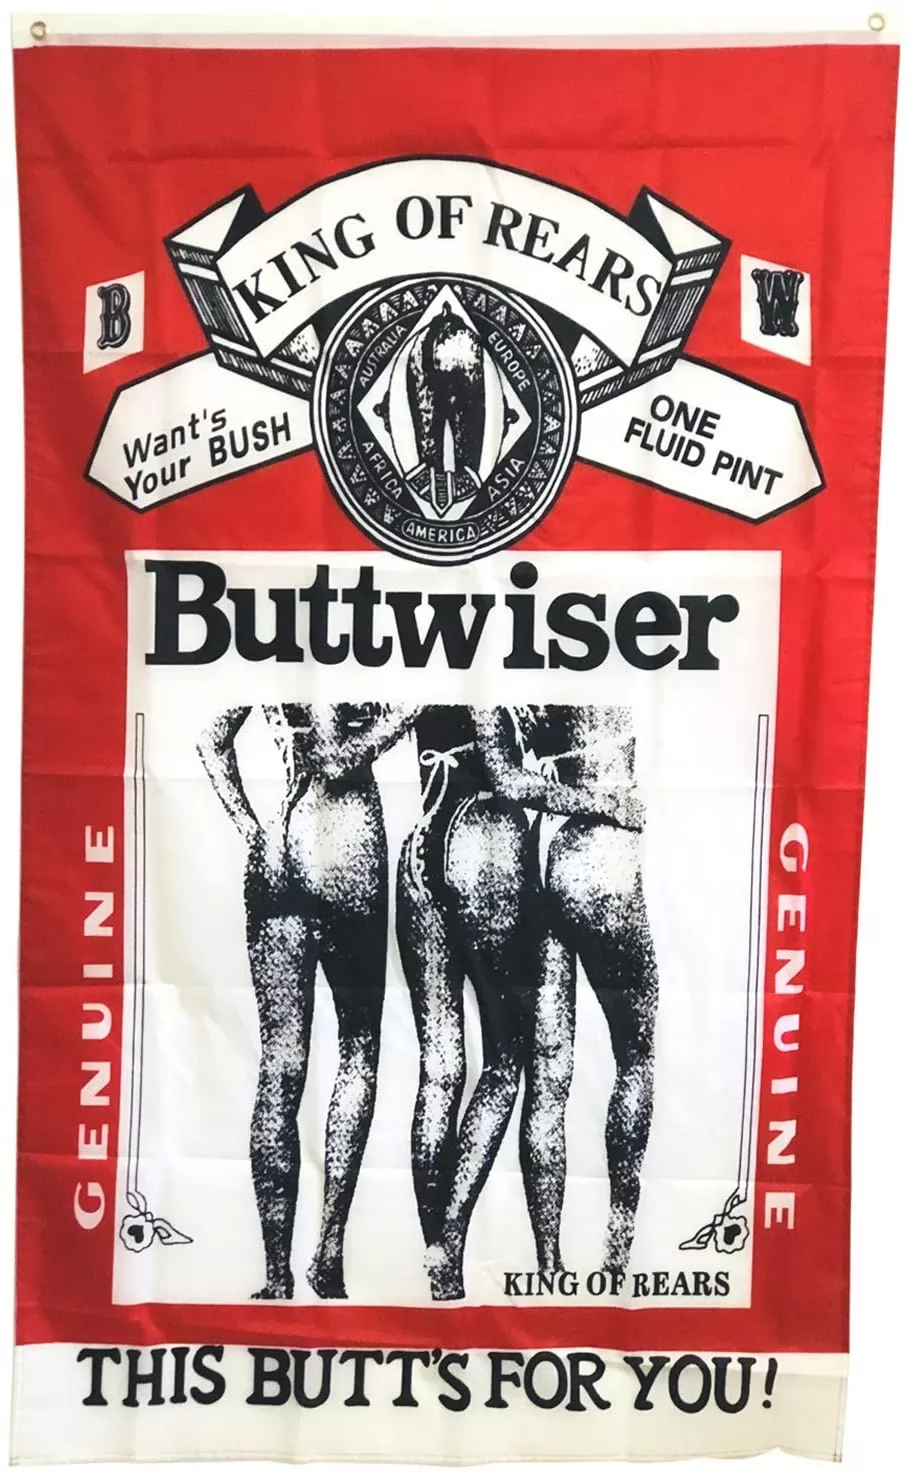 Homissor Buttwiser Budweiser Flag 3X5 Feet - King of Rears This Buttwiser for You - Guys Funny College Dorm Beer Flag